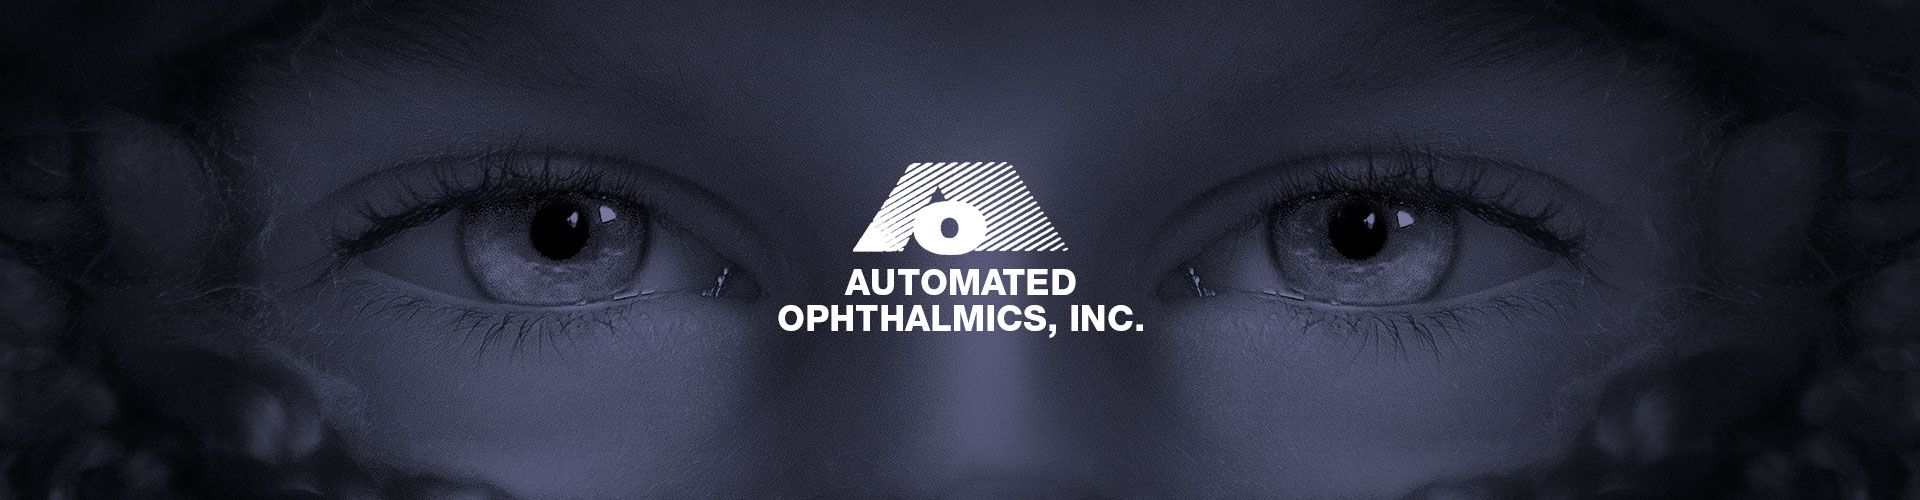 Case Study - Automated Ophthalmics